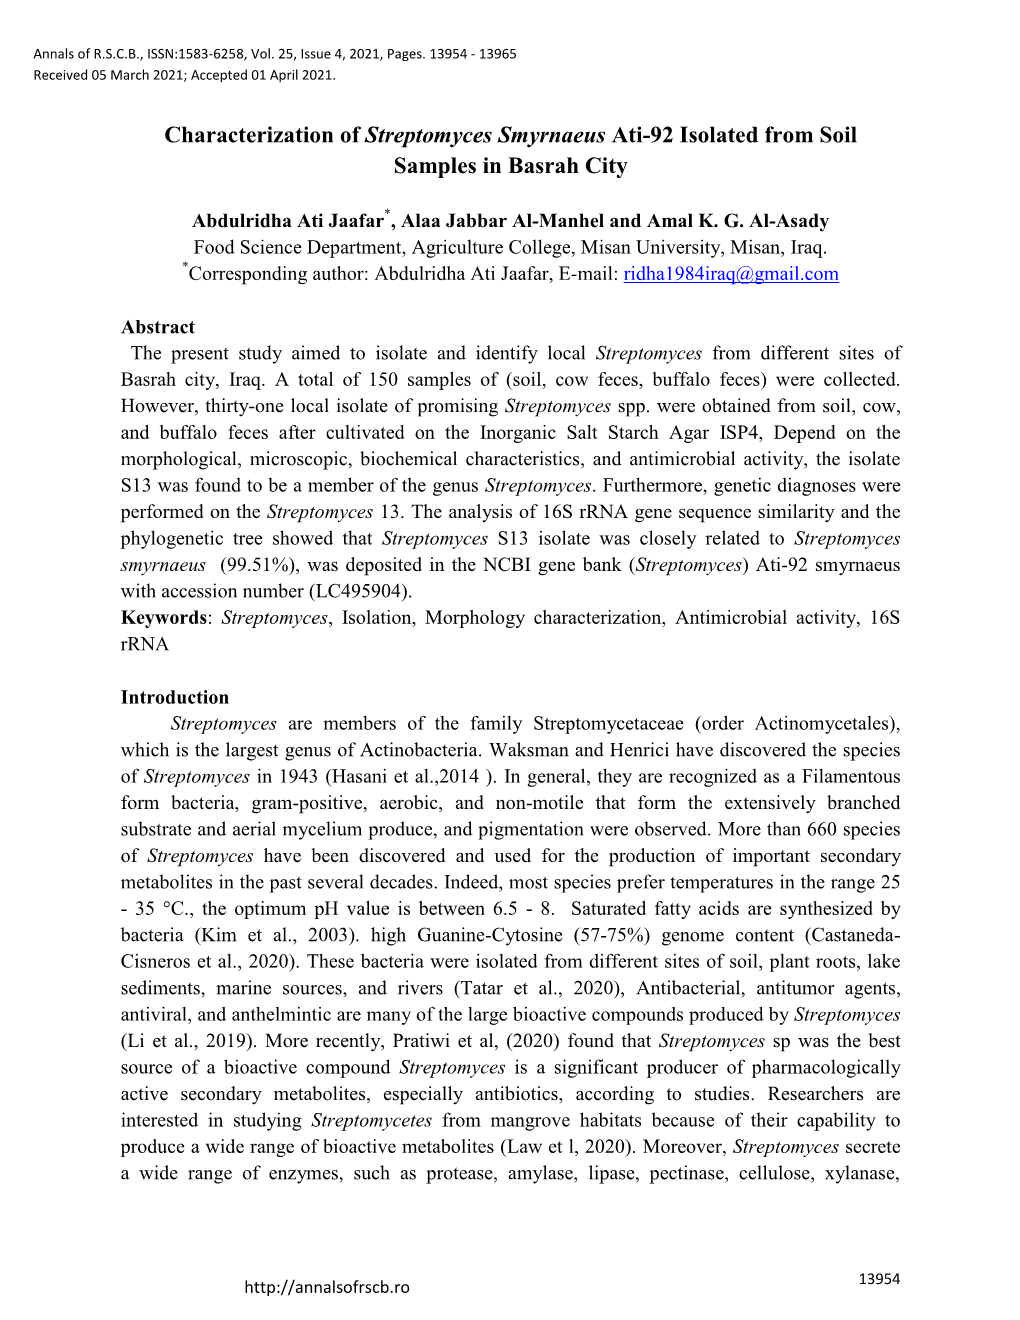 Characterization of Streptomyces Smyrnaeus Ati-92 Isolated from Soil Samples in Basrah City